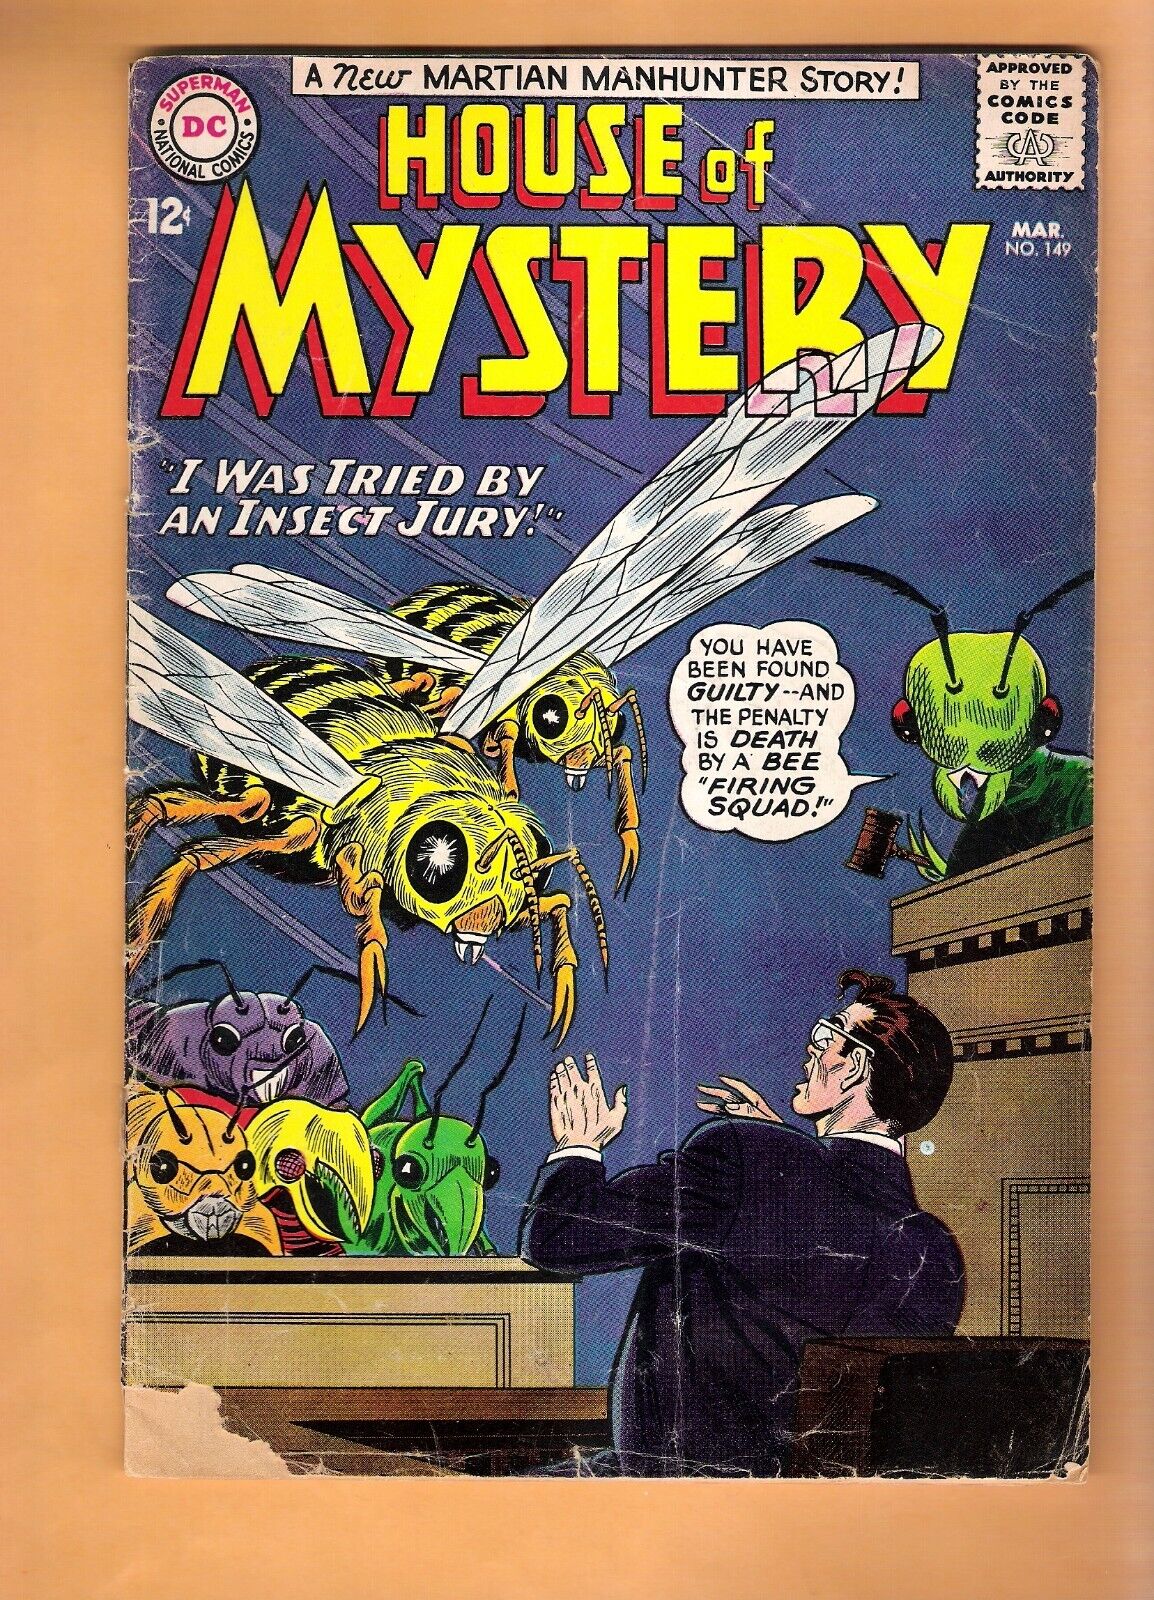 HOUSE of MYSTERY #149 vintage DC comic book 1965 VG Martian Manhunter